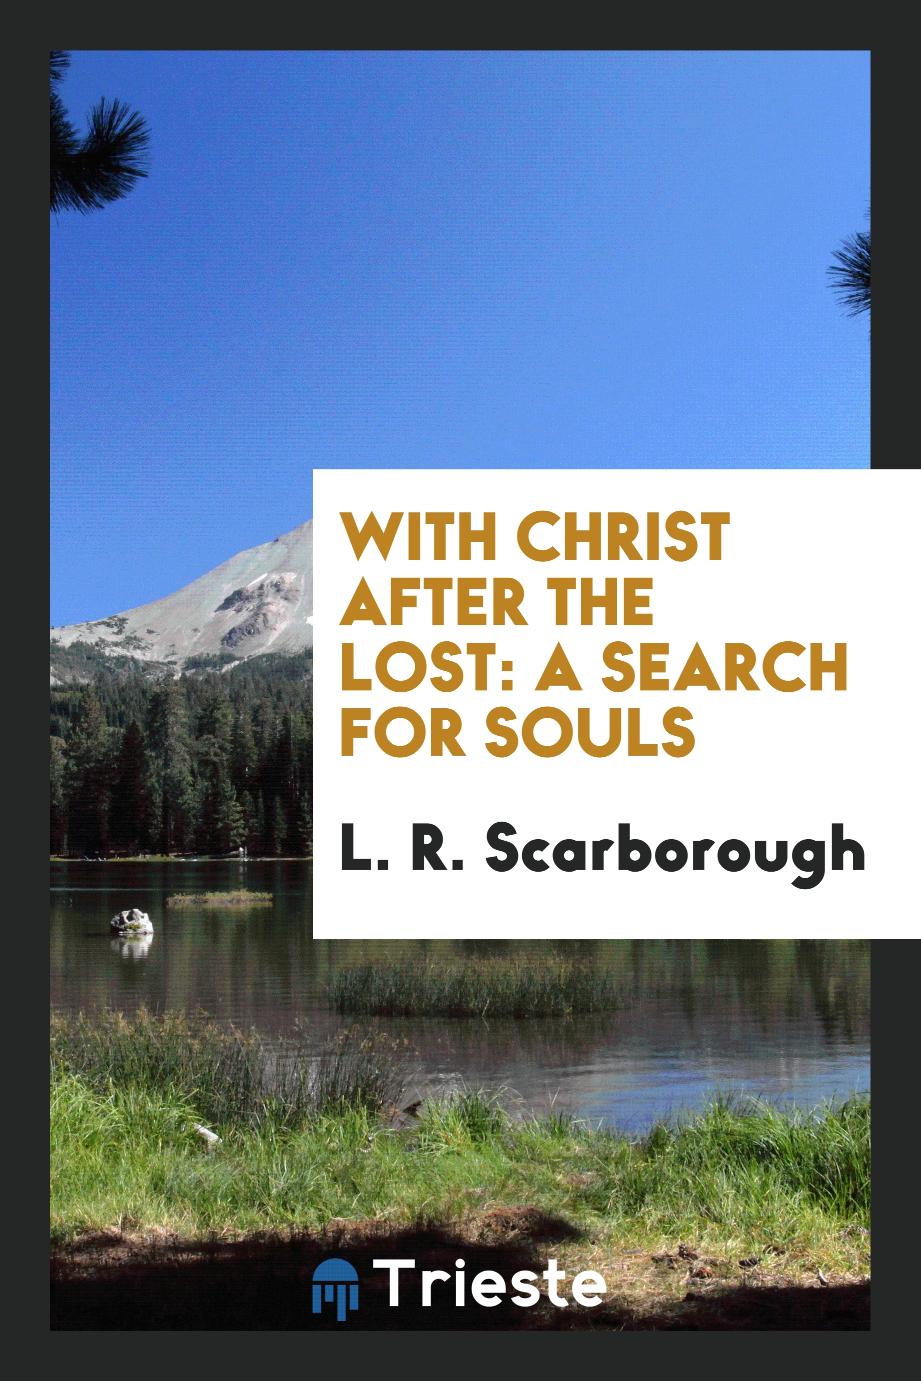 With Christ After the Lost: A Search for Souls